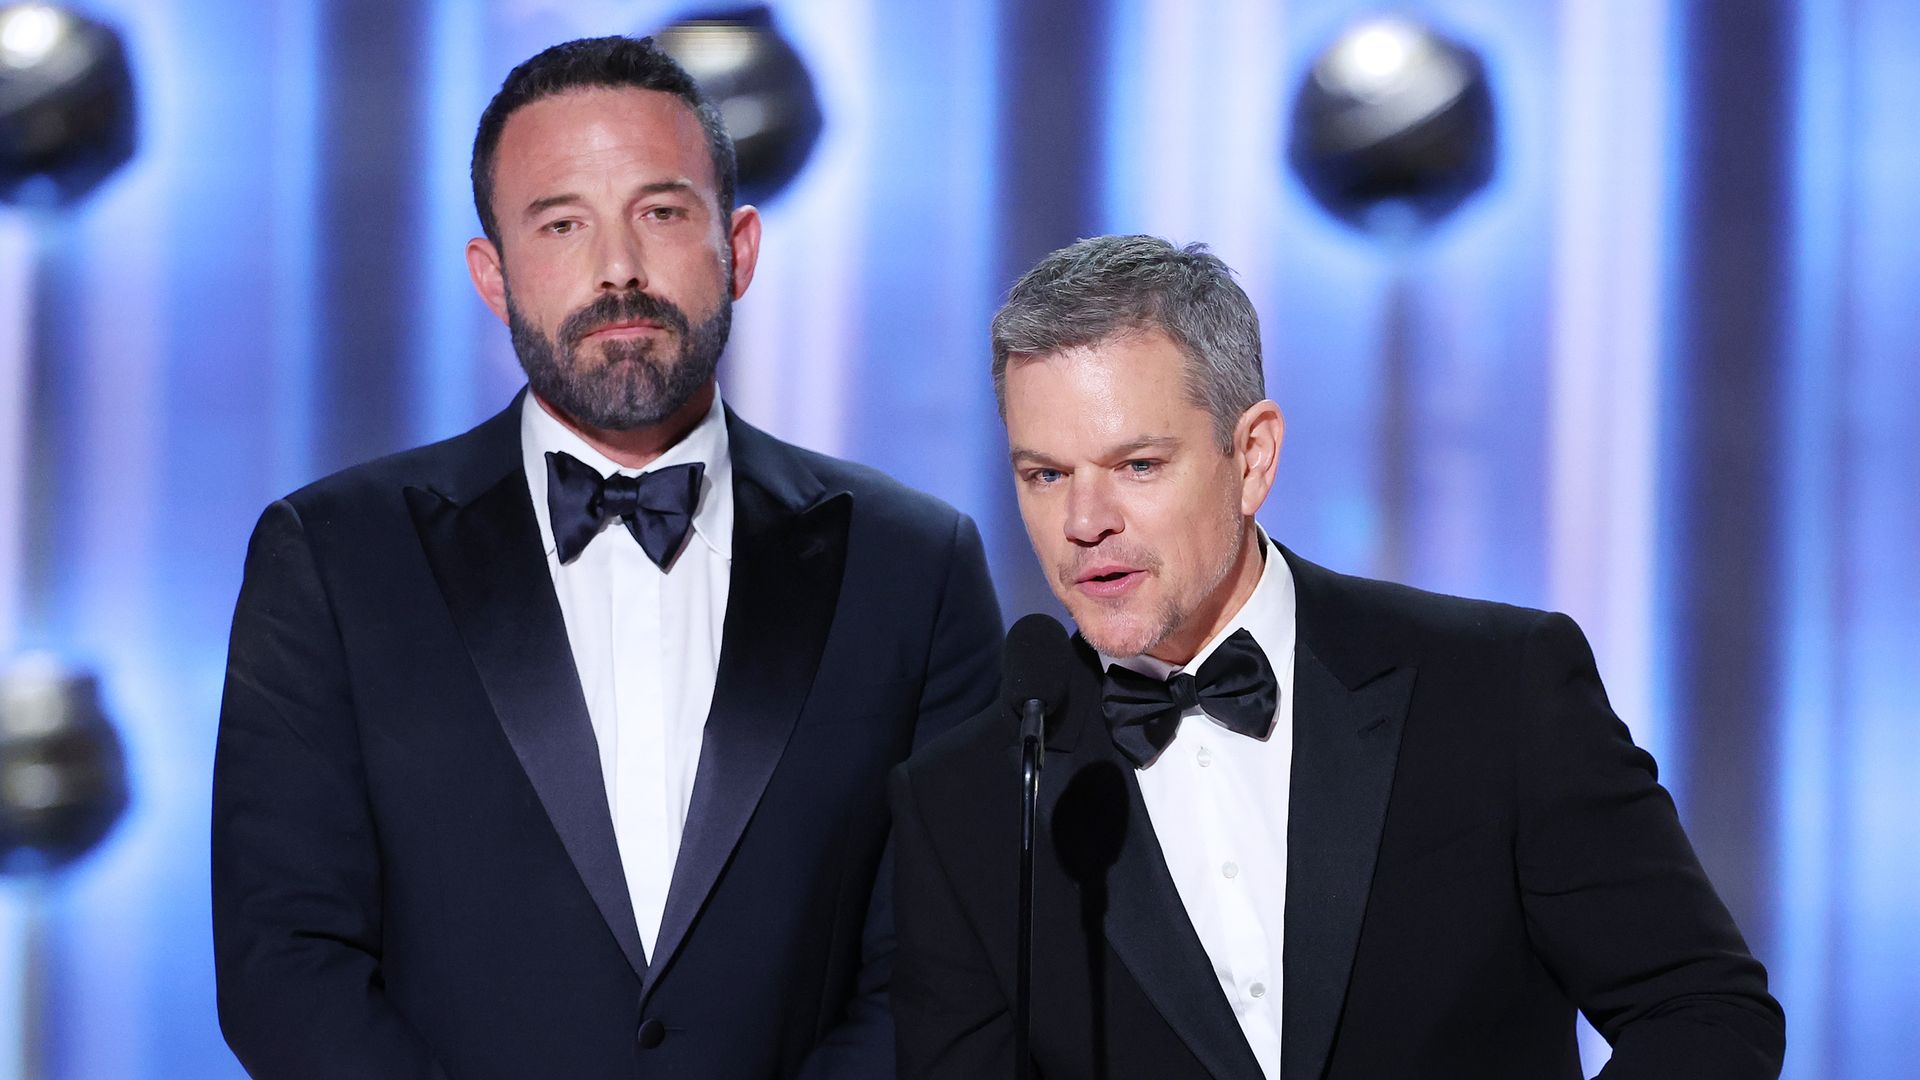 Matt Damon debuts silver fox look at the Golden Globes – here are 5 other  suave actors rocking the look